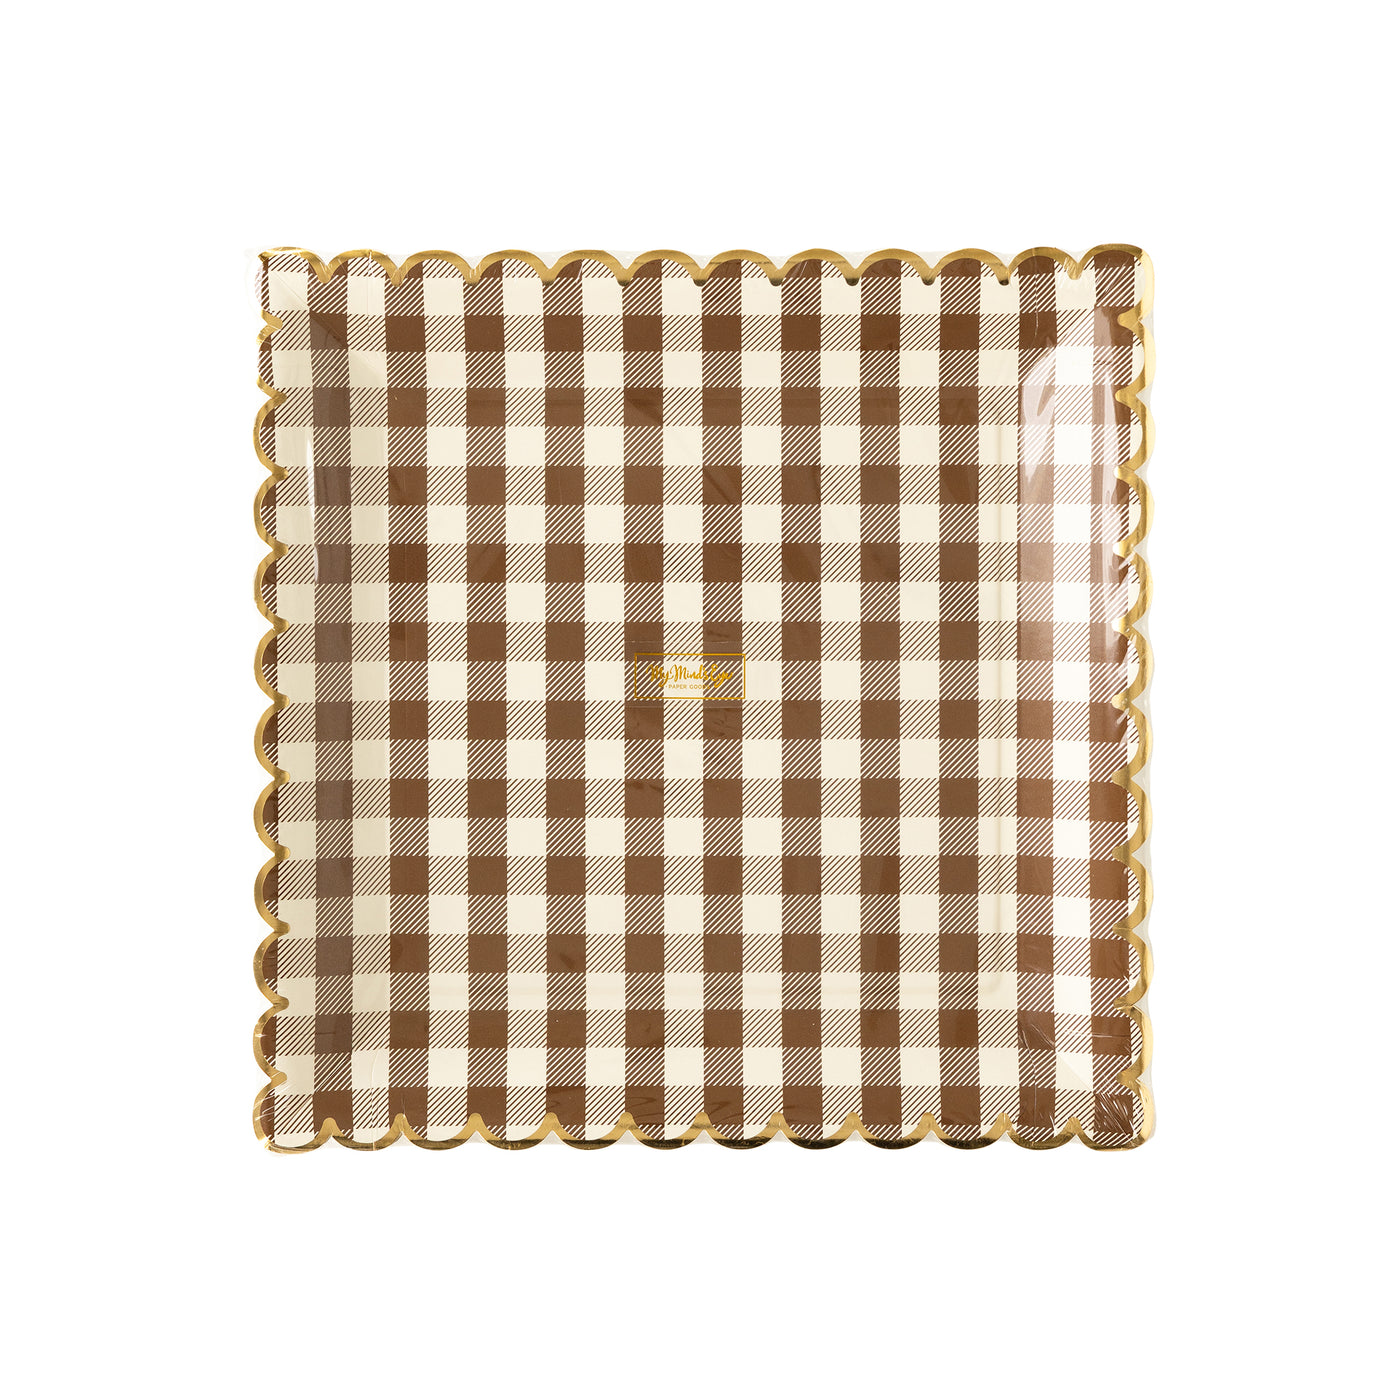 THP1142 - Brown Gingham Scalloped Plate